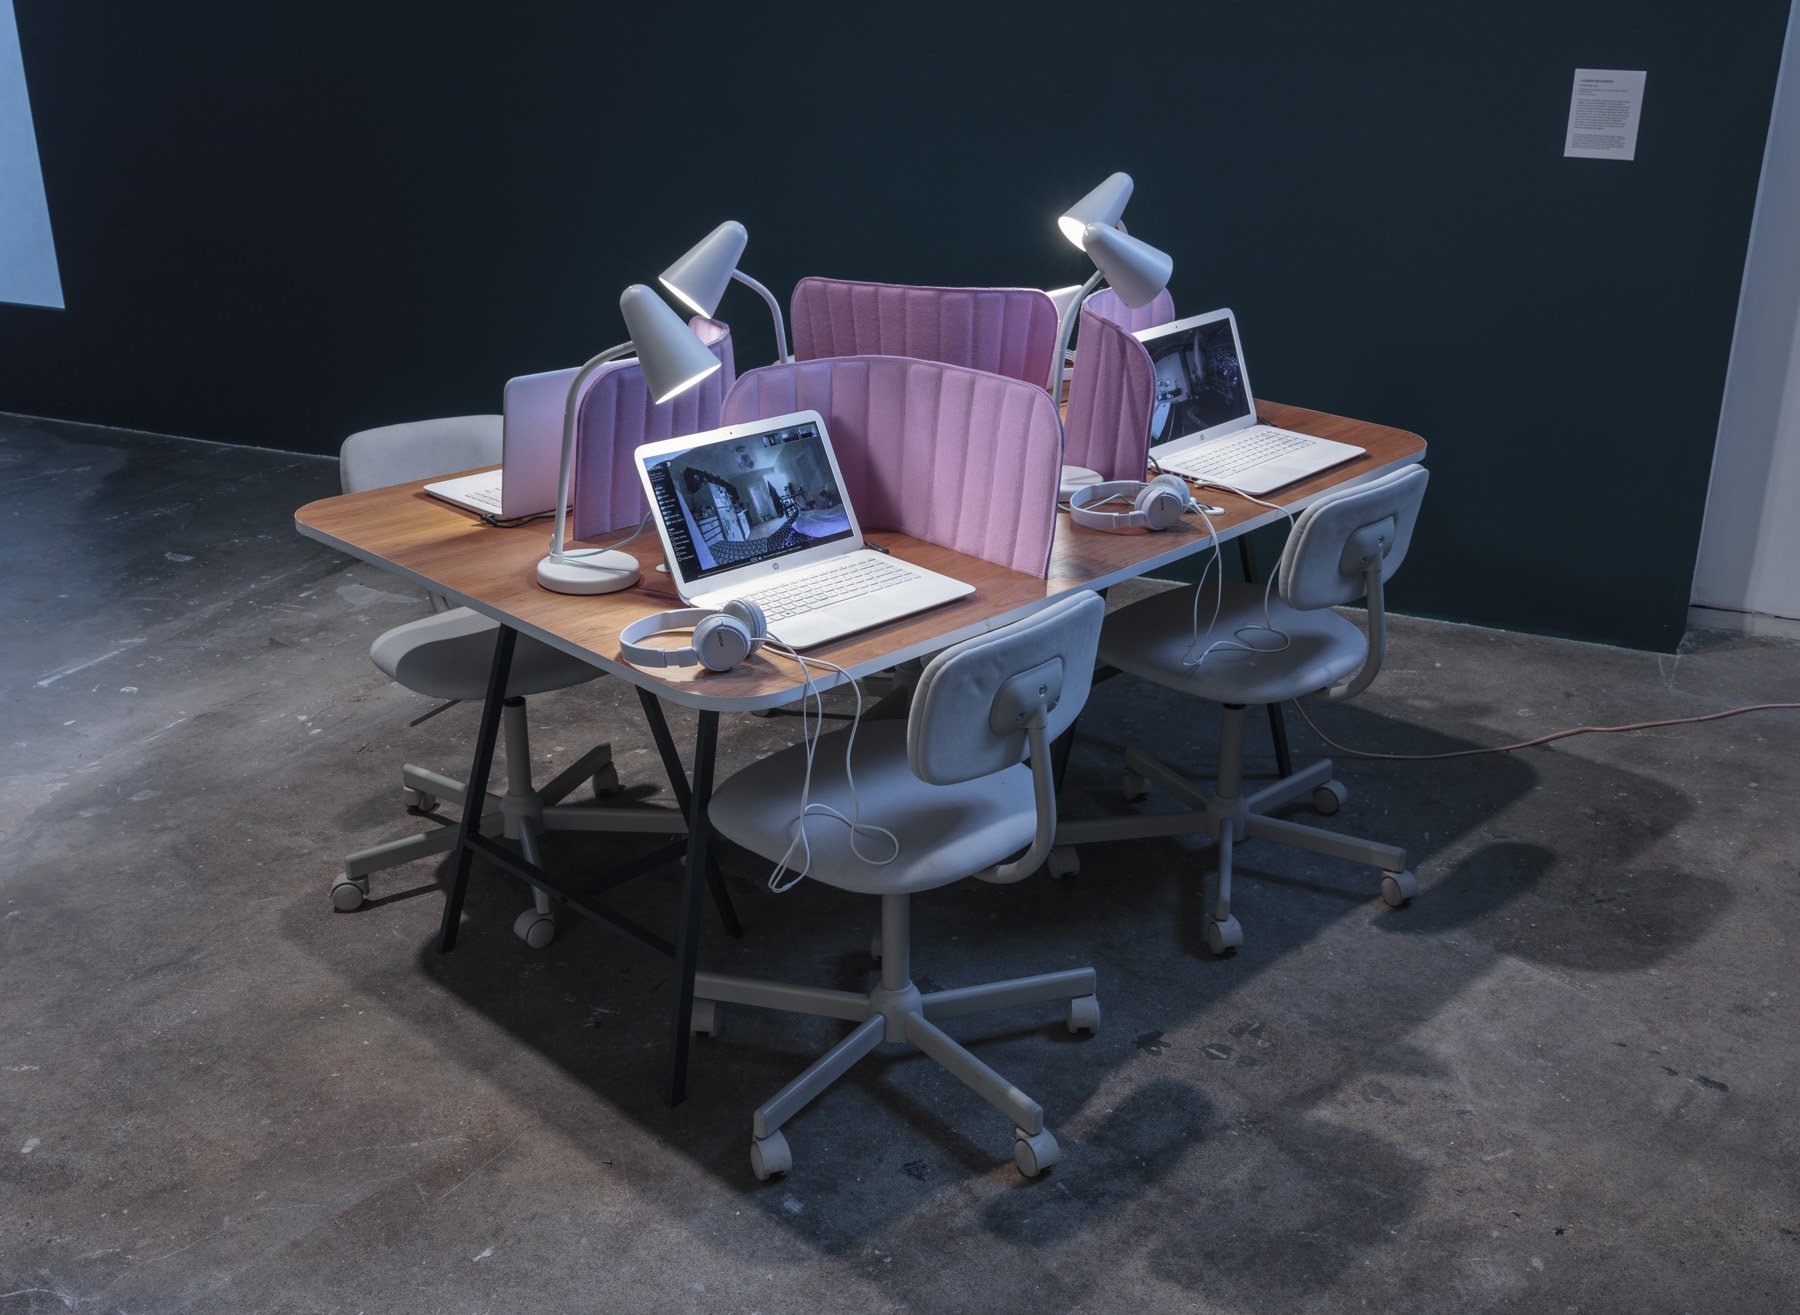 An installation of a table with four seats that have identical white chairs, white open laptops with screens displaying virtual spaces, headphones, lamps, and pink foam desk dividers creating, creating designated and separate spaces per seat.